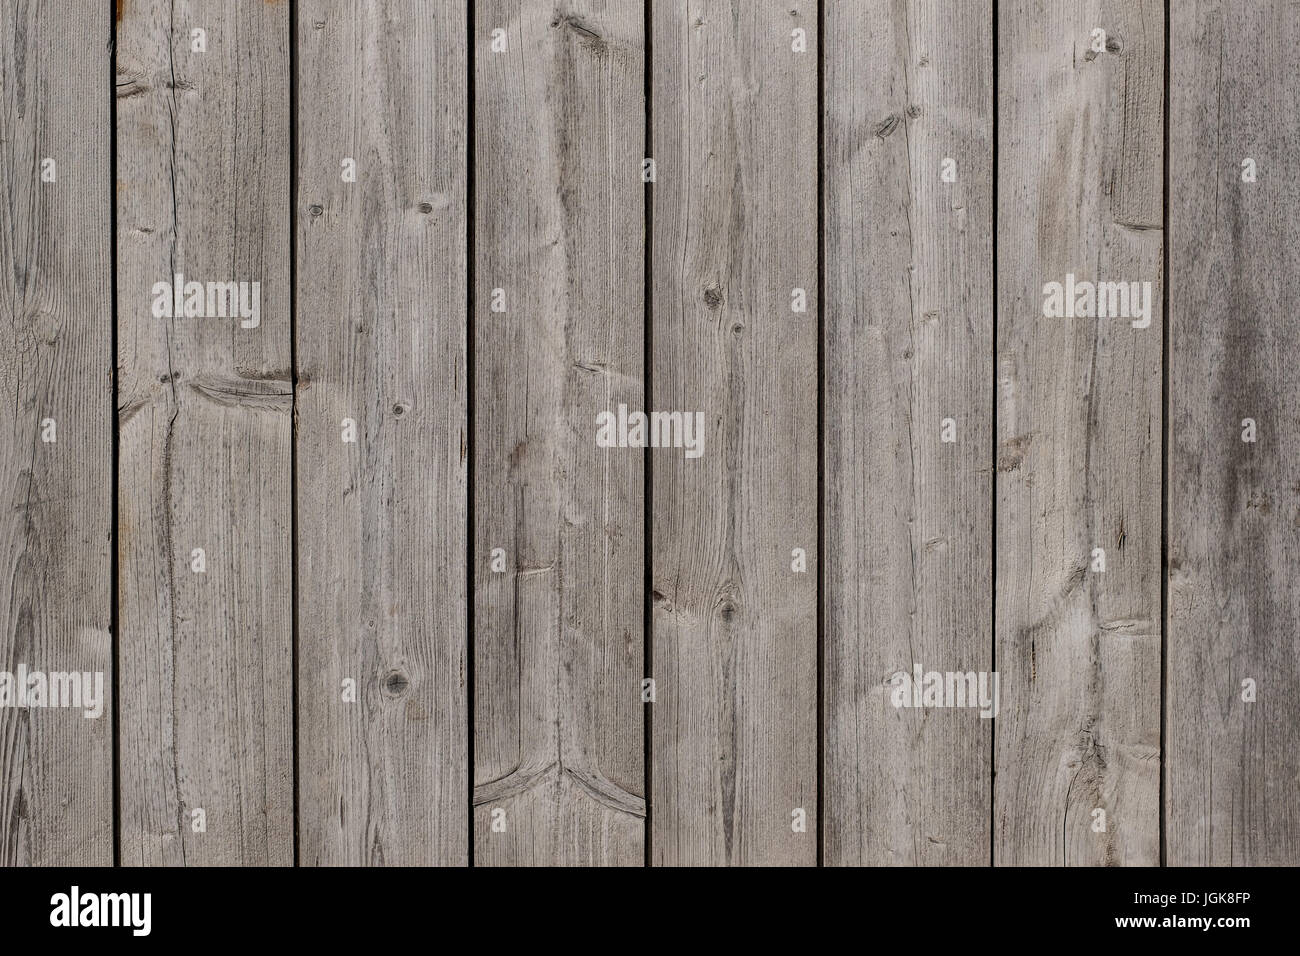 wood background -  wooden background, wood texture Stock Photo